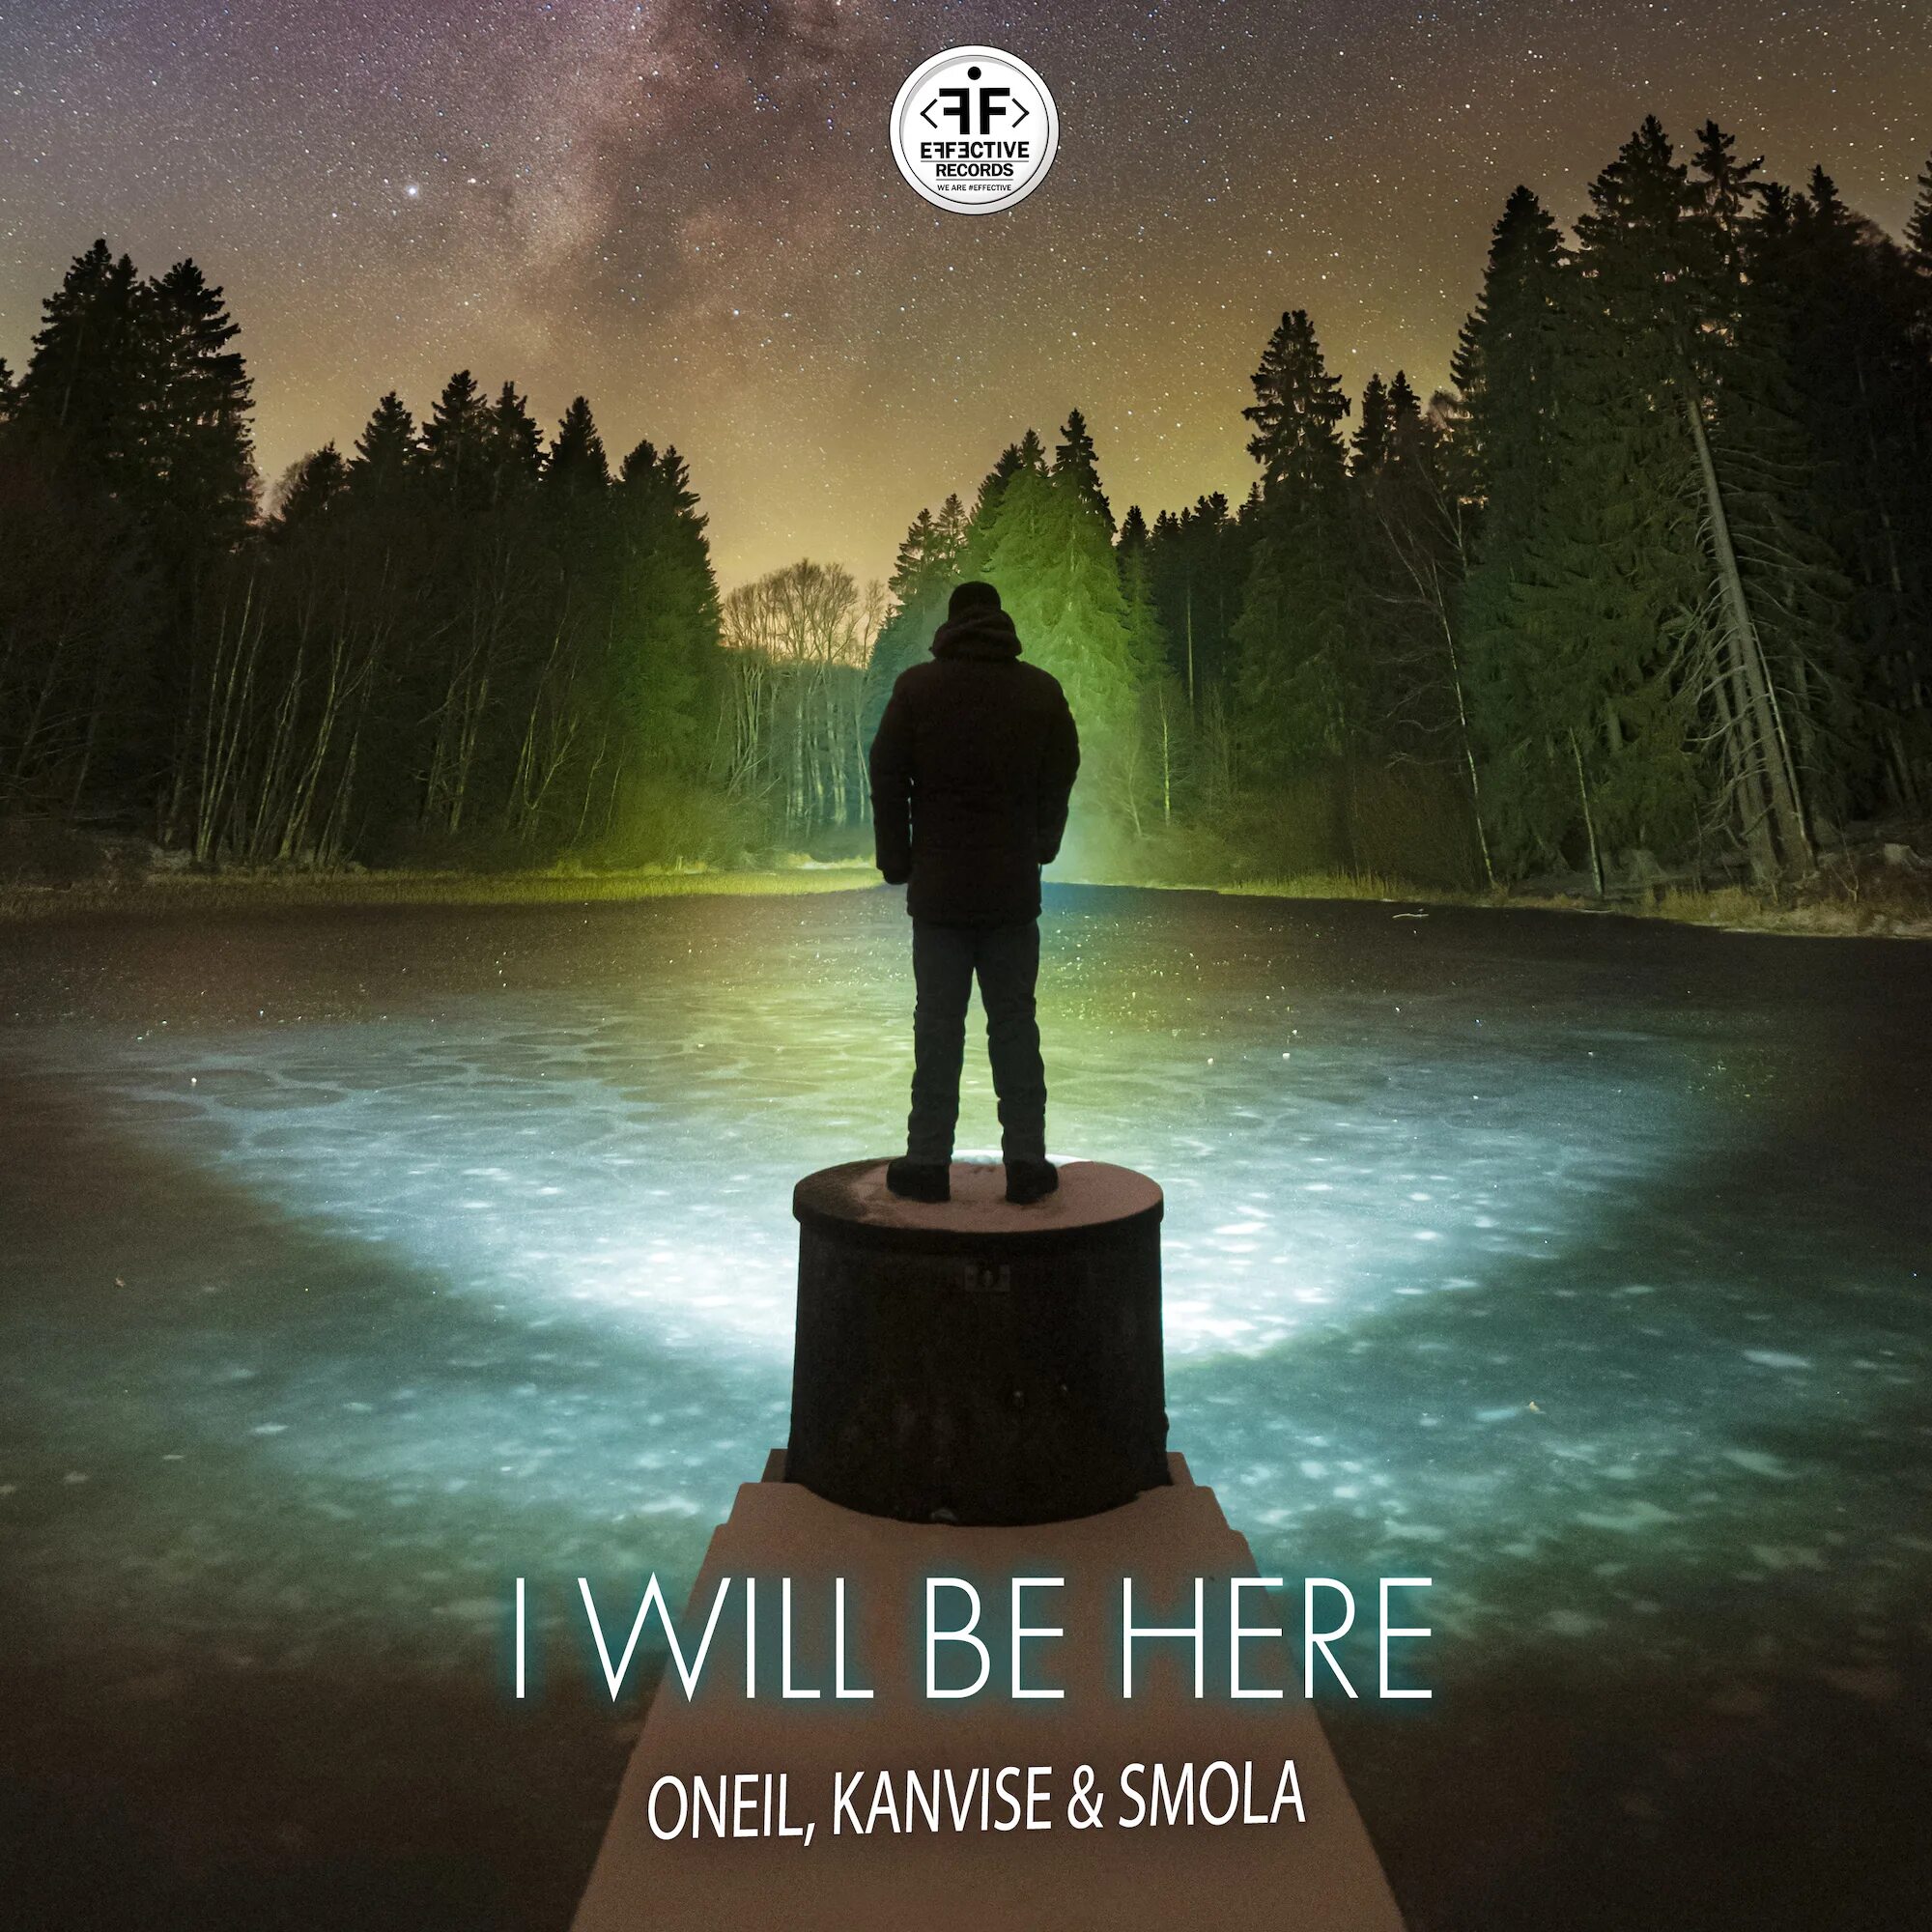 Oneil kanvise favia organ shut your. Kanvise. Oneil, Smola - addicted. I will be here Oneil, Kanvise, Smola. Oneil feat Aize Kanvise.